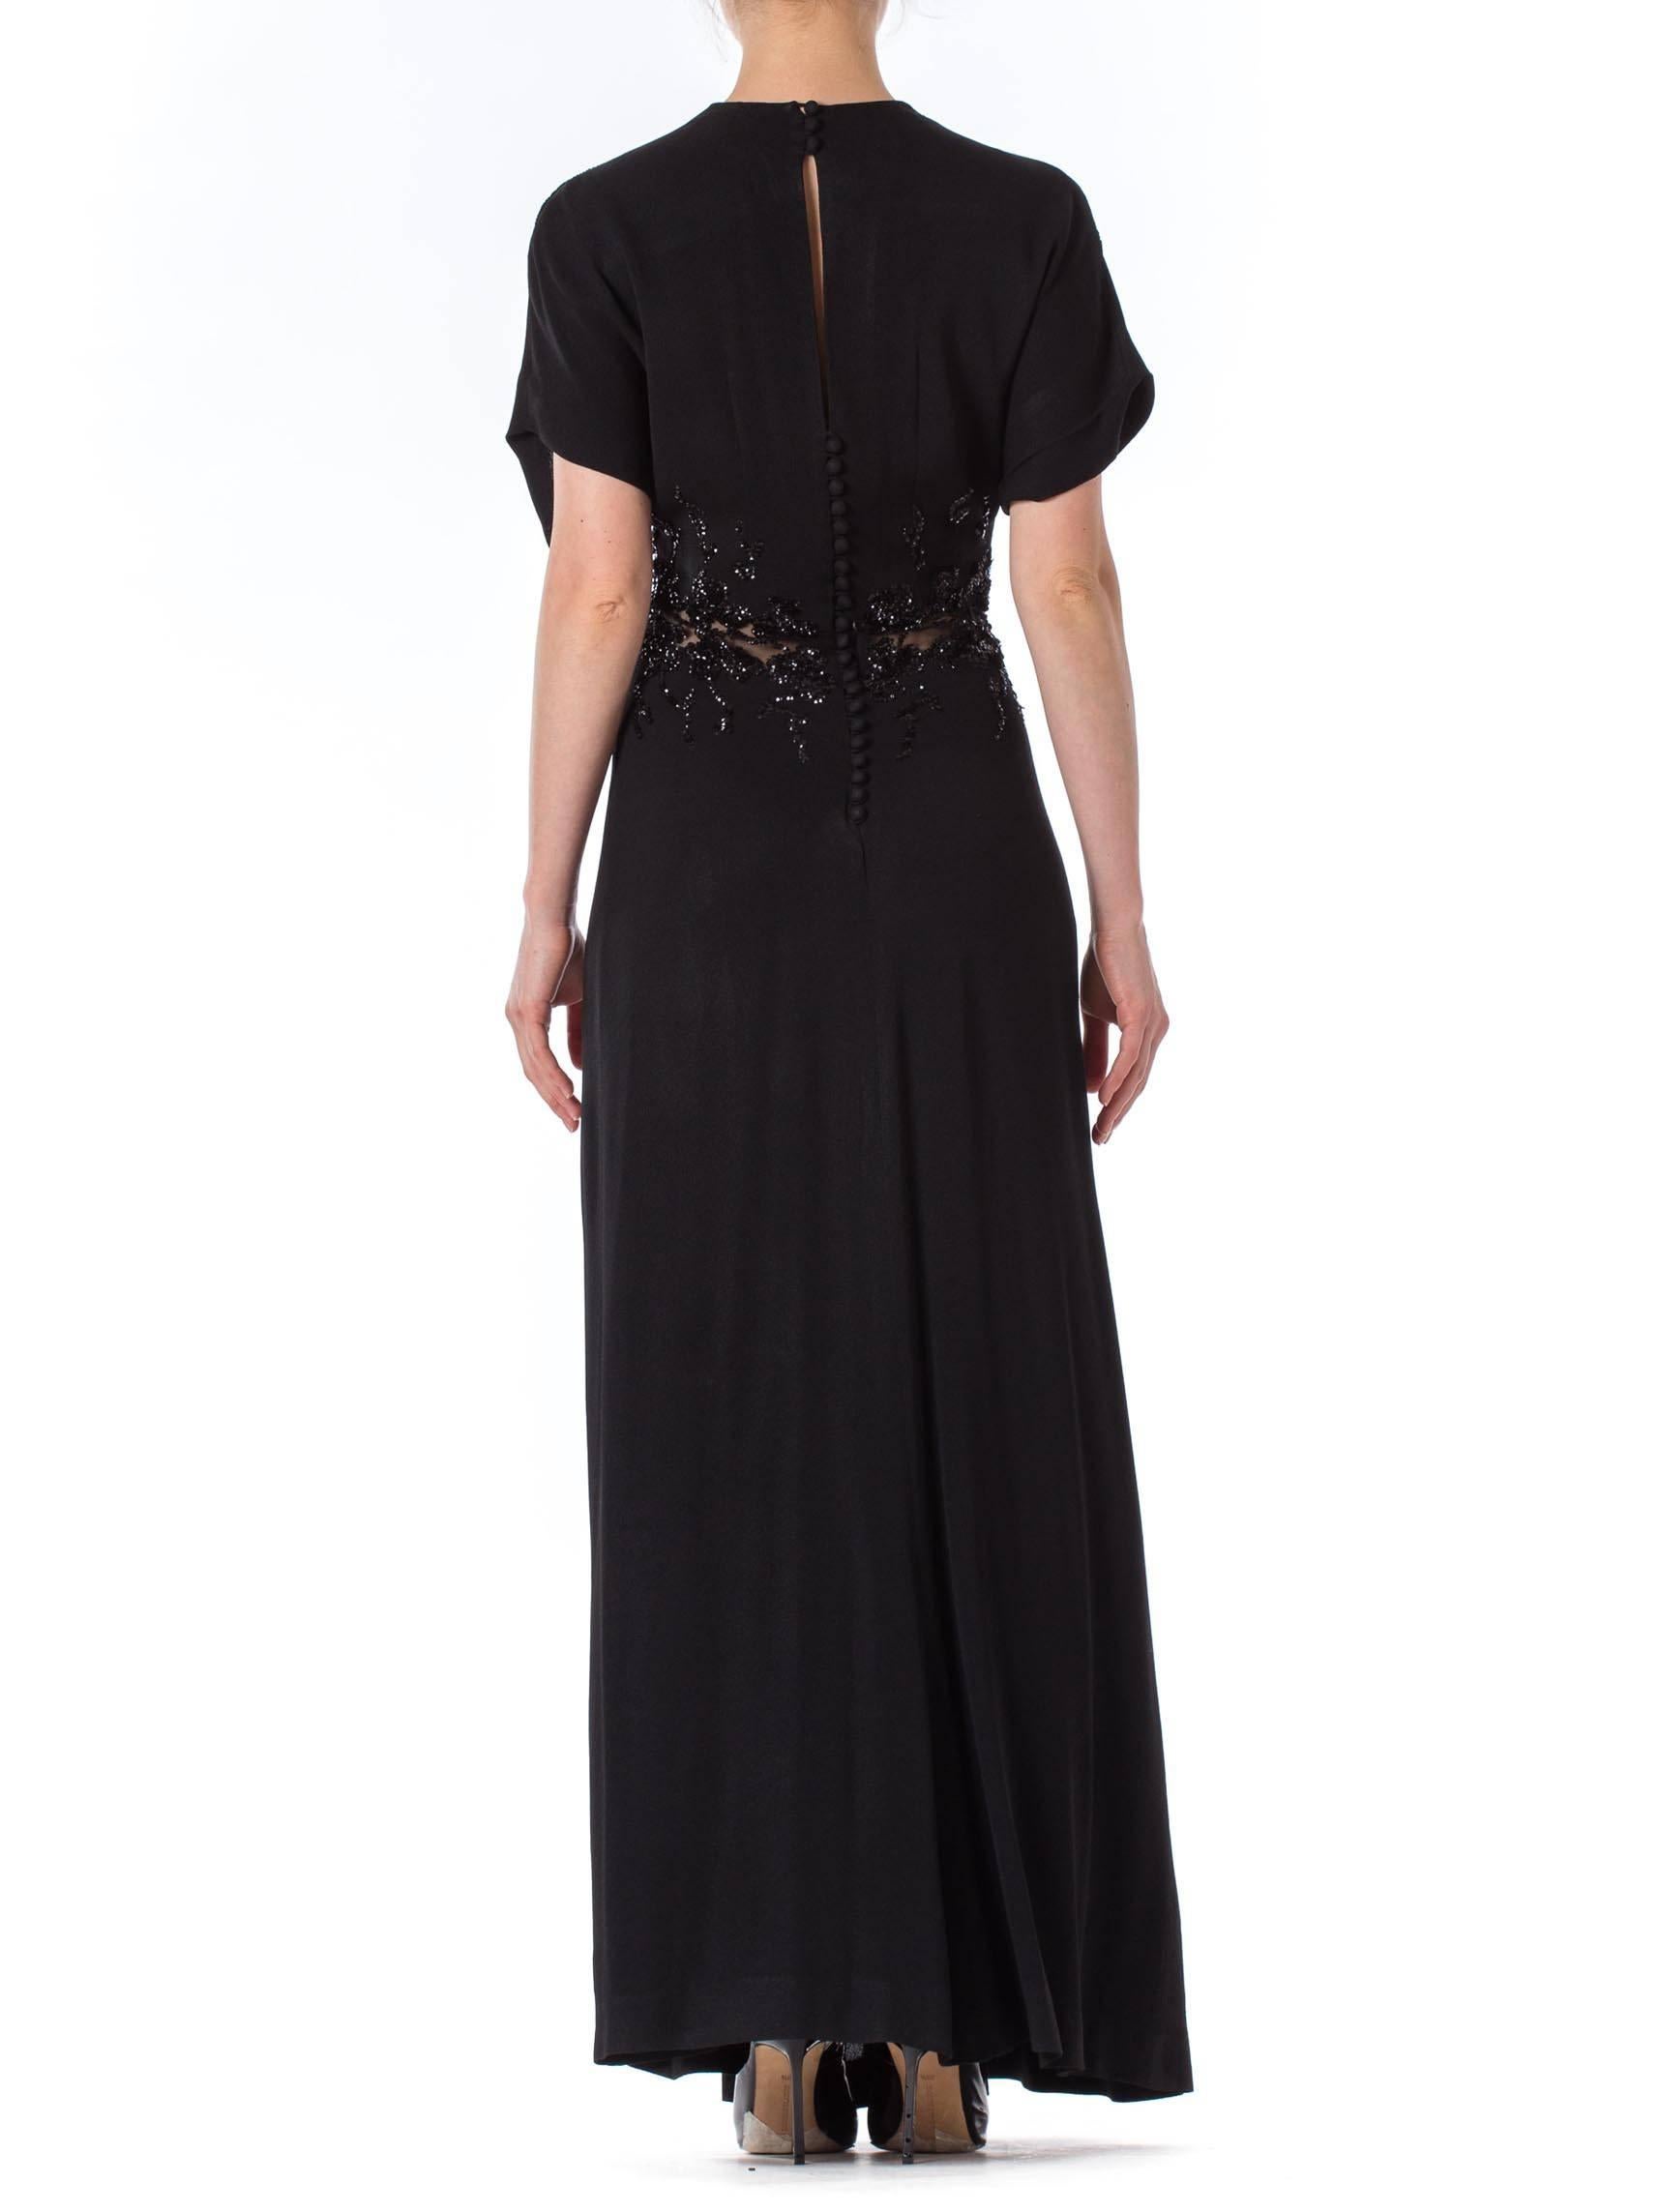 Sequined Jean Carol 1930s Gown 1